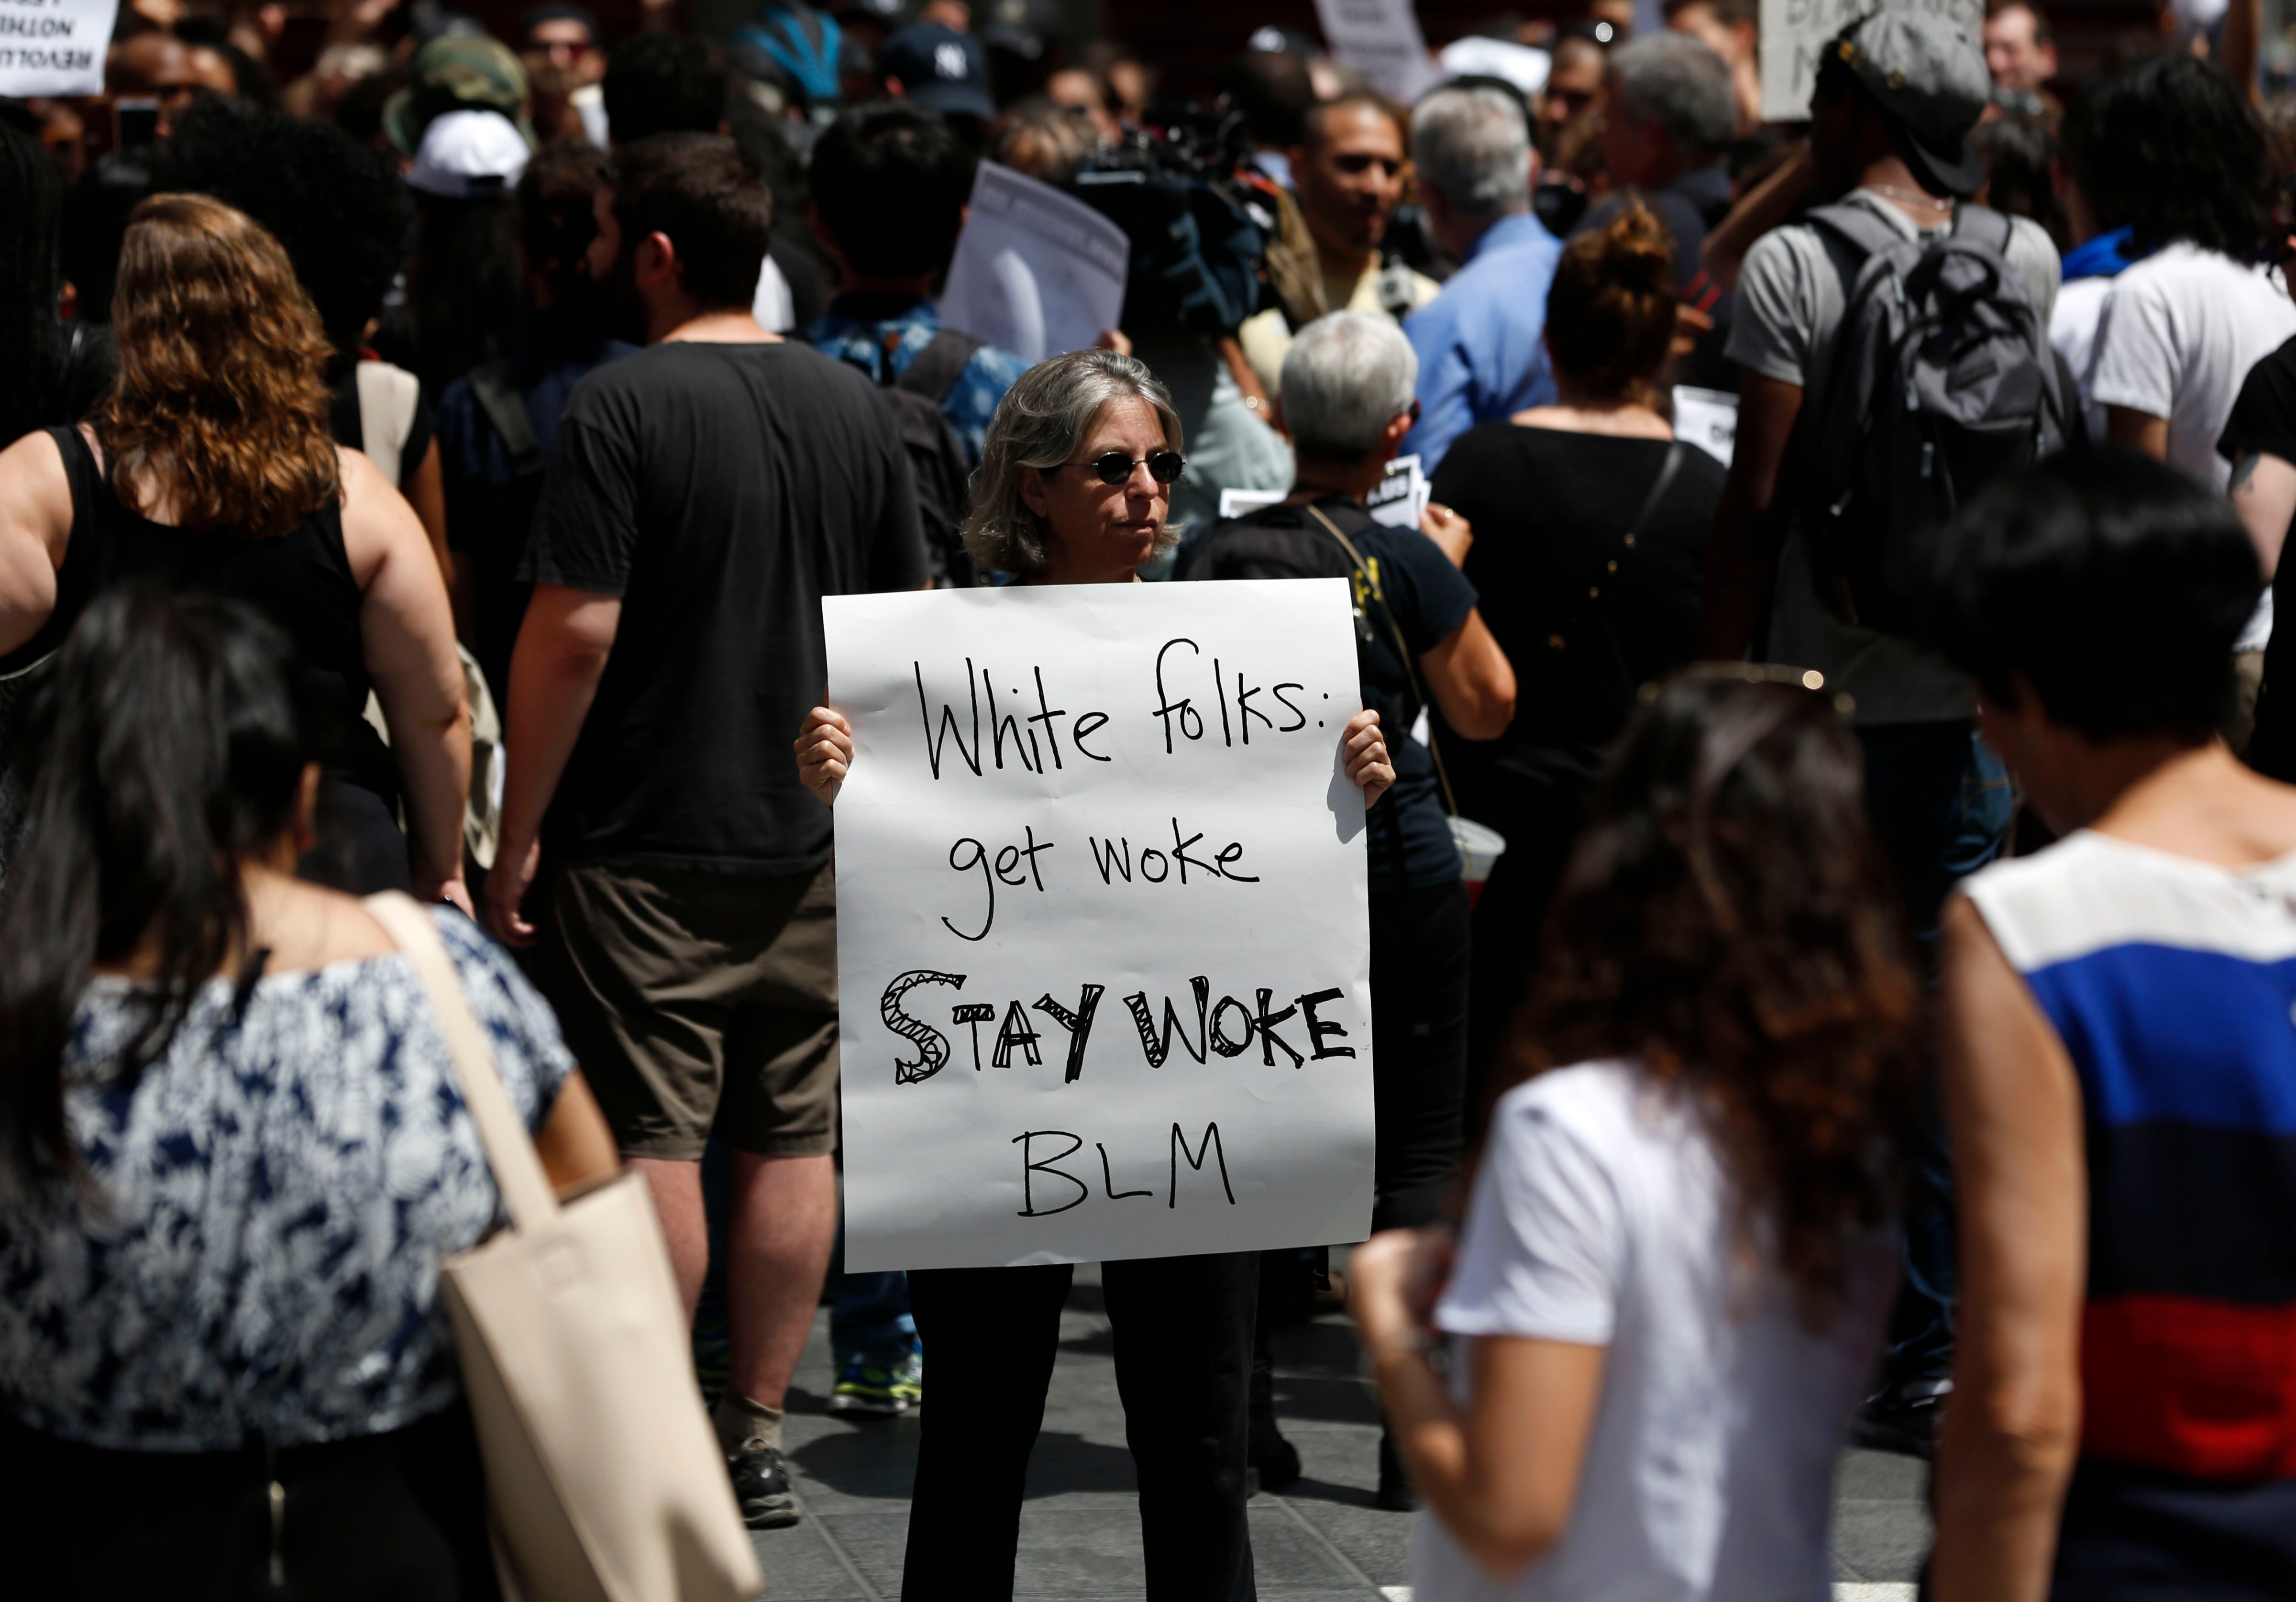 Protesters hold signs during a Black Lives Matter demonstration in New York, July 10, 2016. (Seth Wenig—AP)